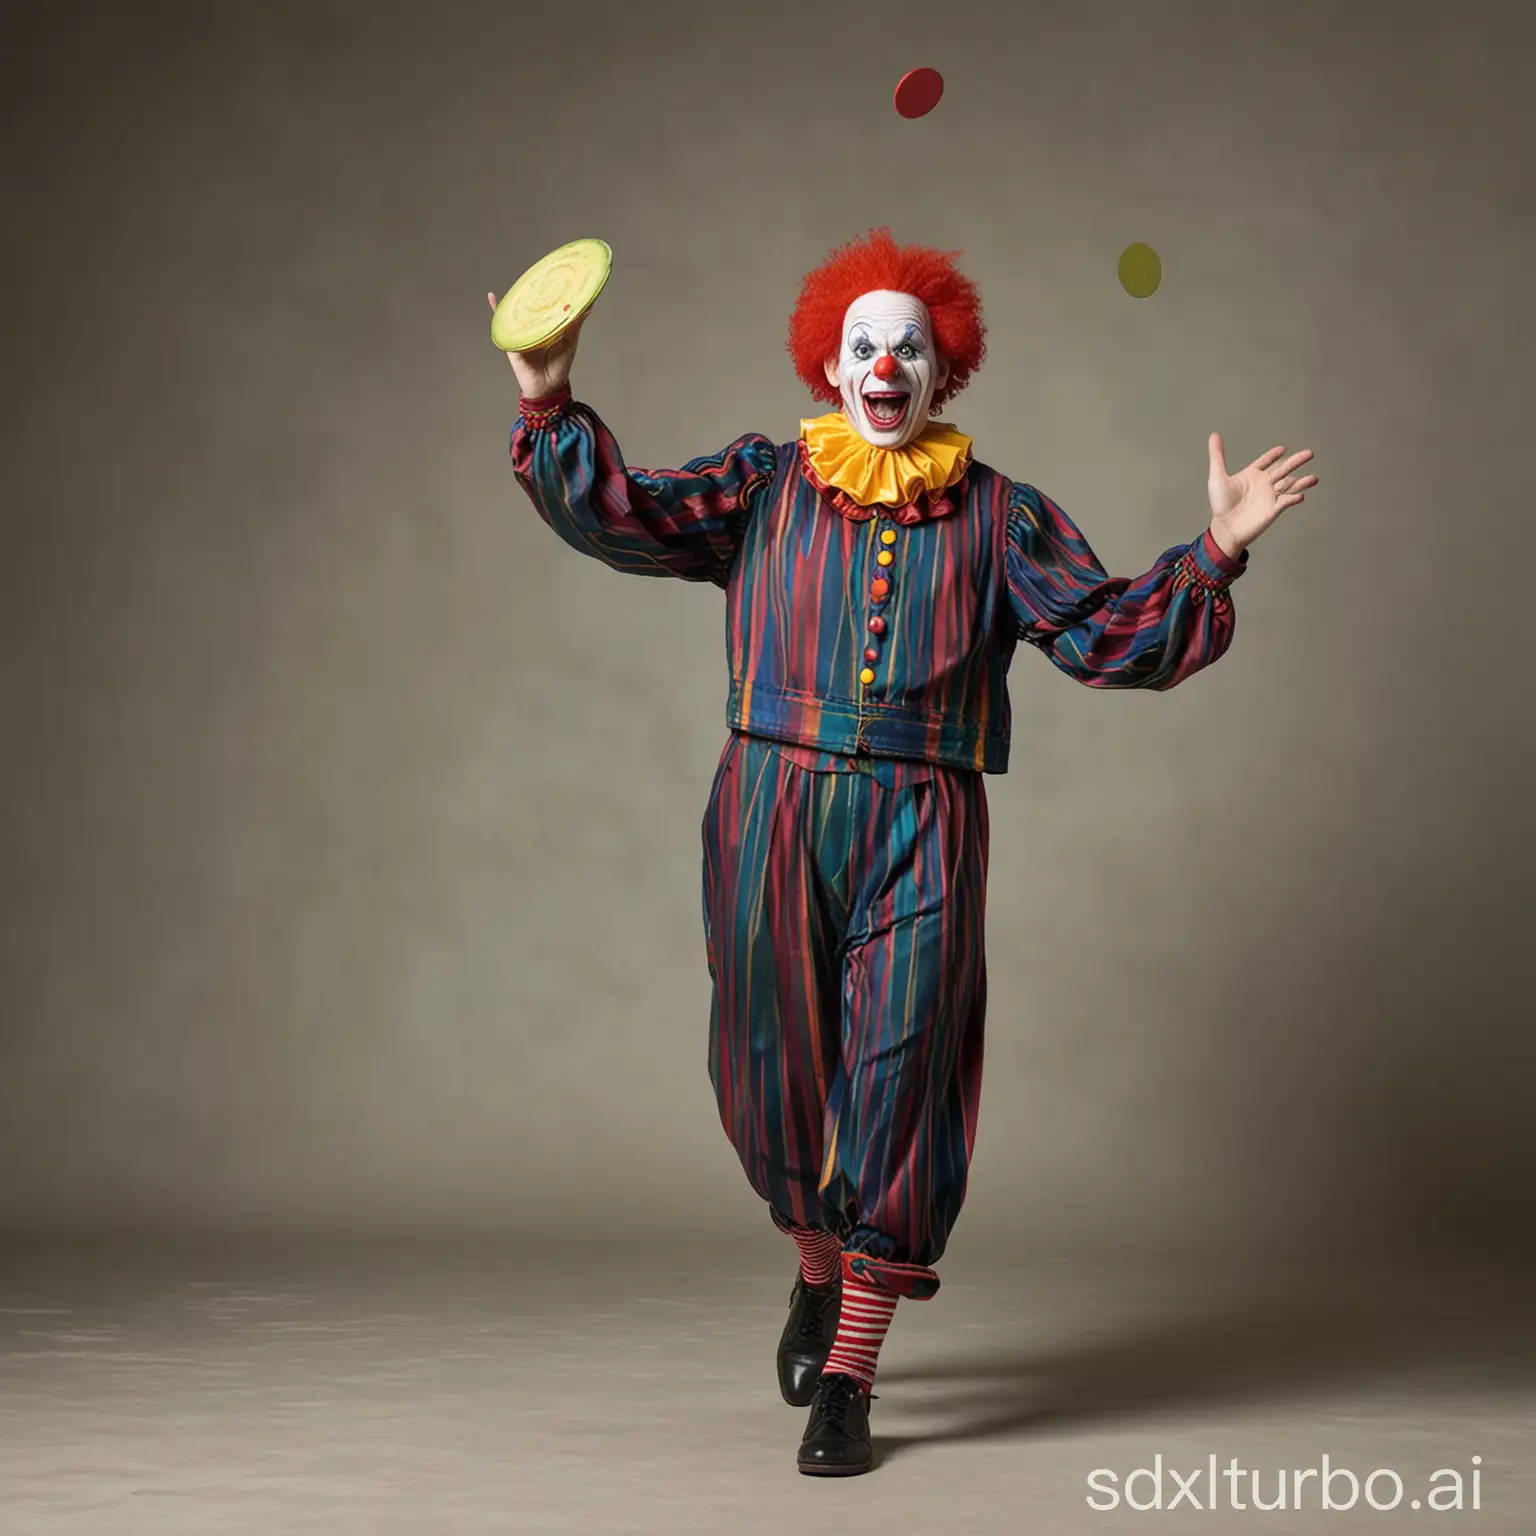 a clown juggles with frisbee, knife, cucumber